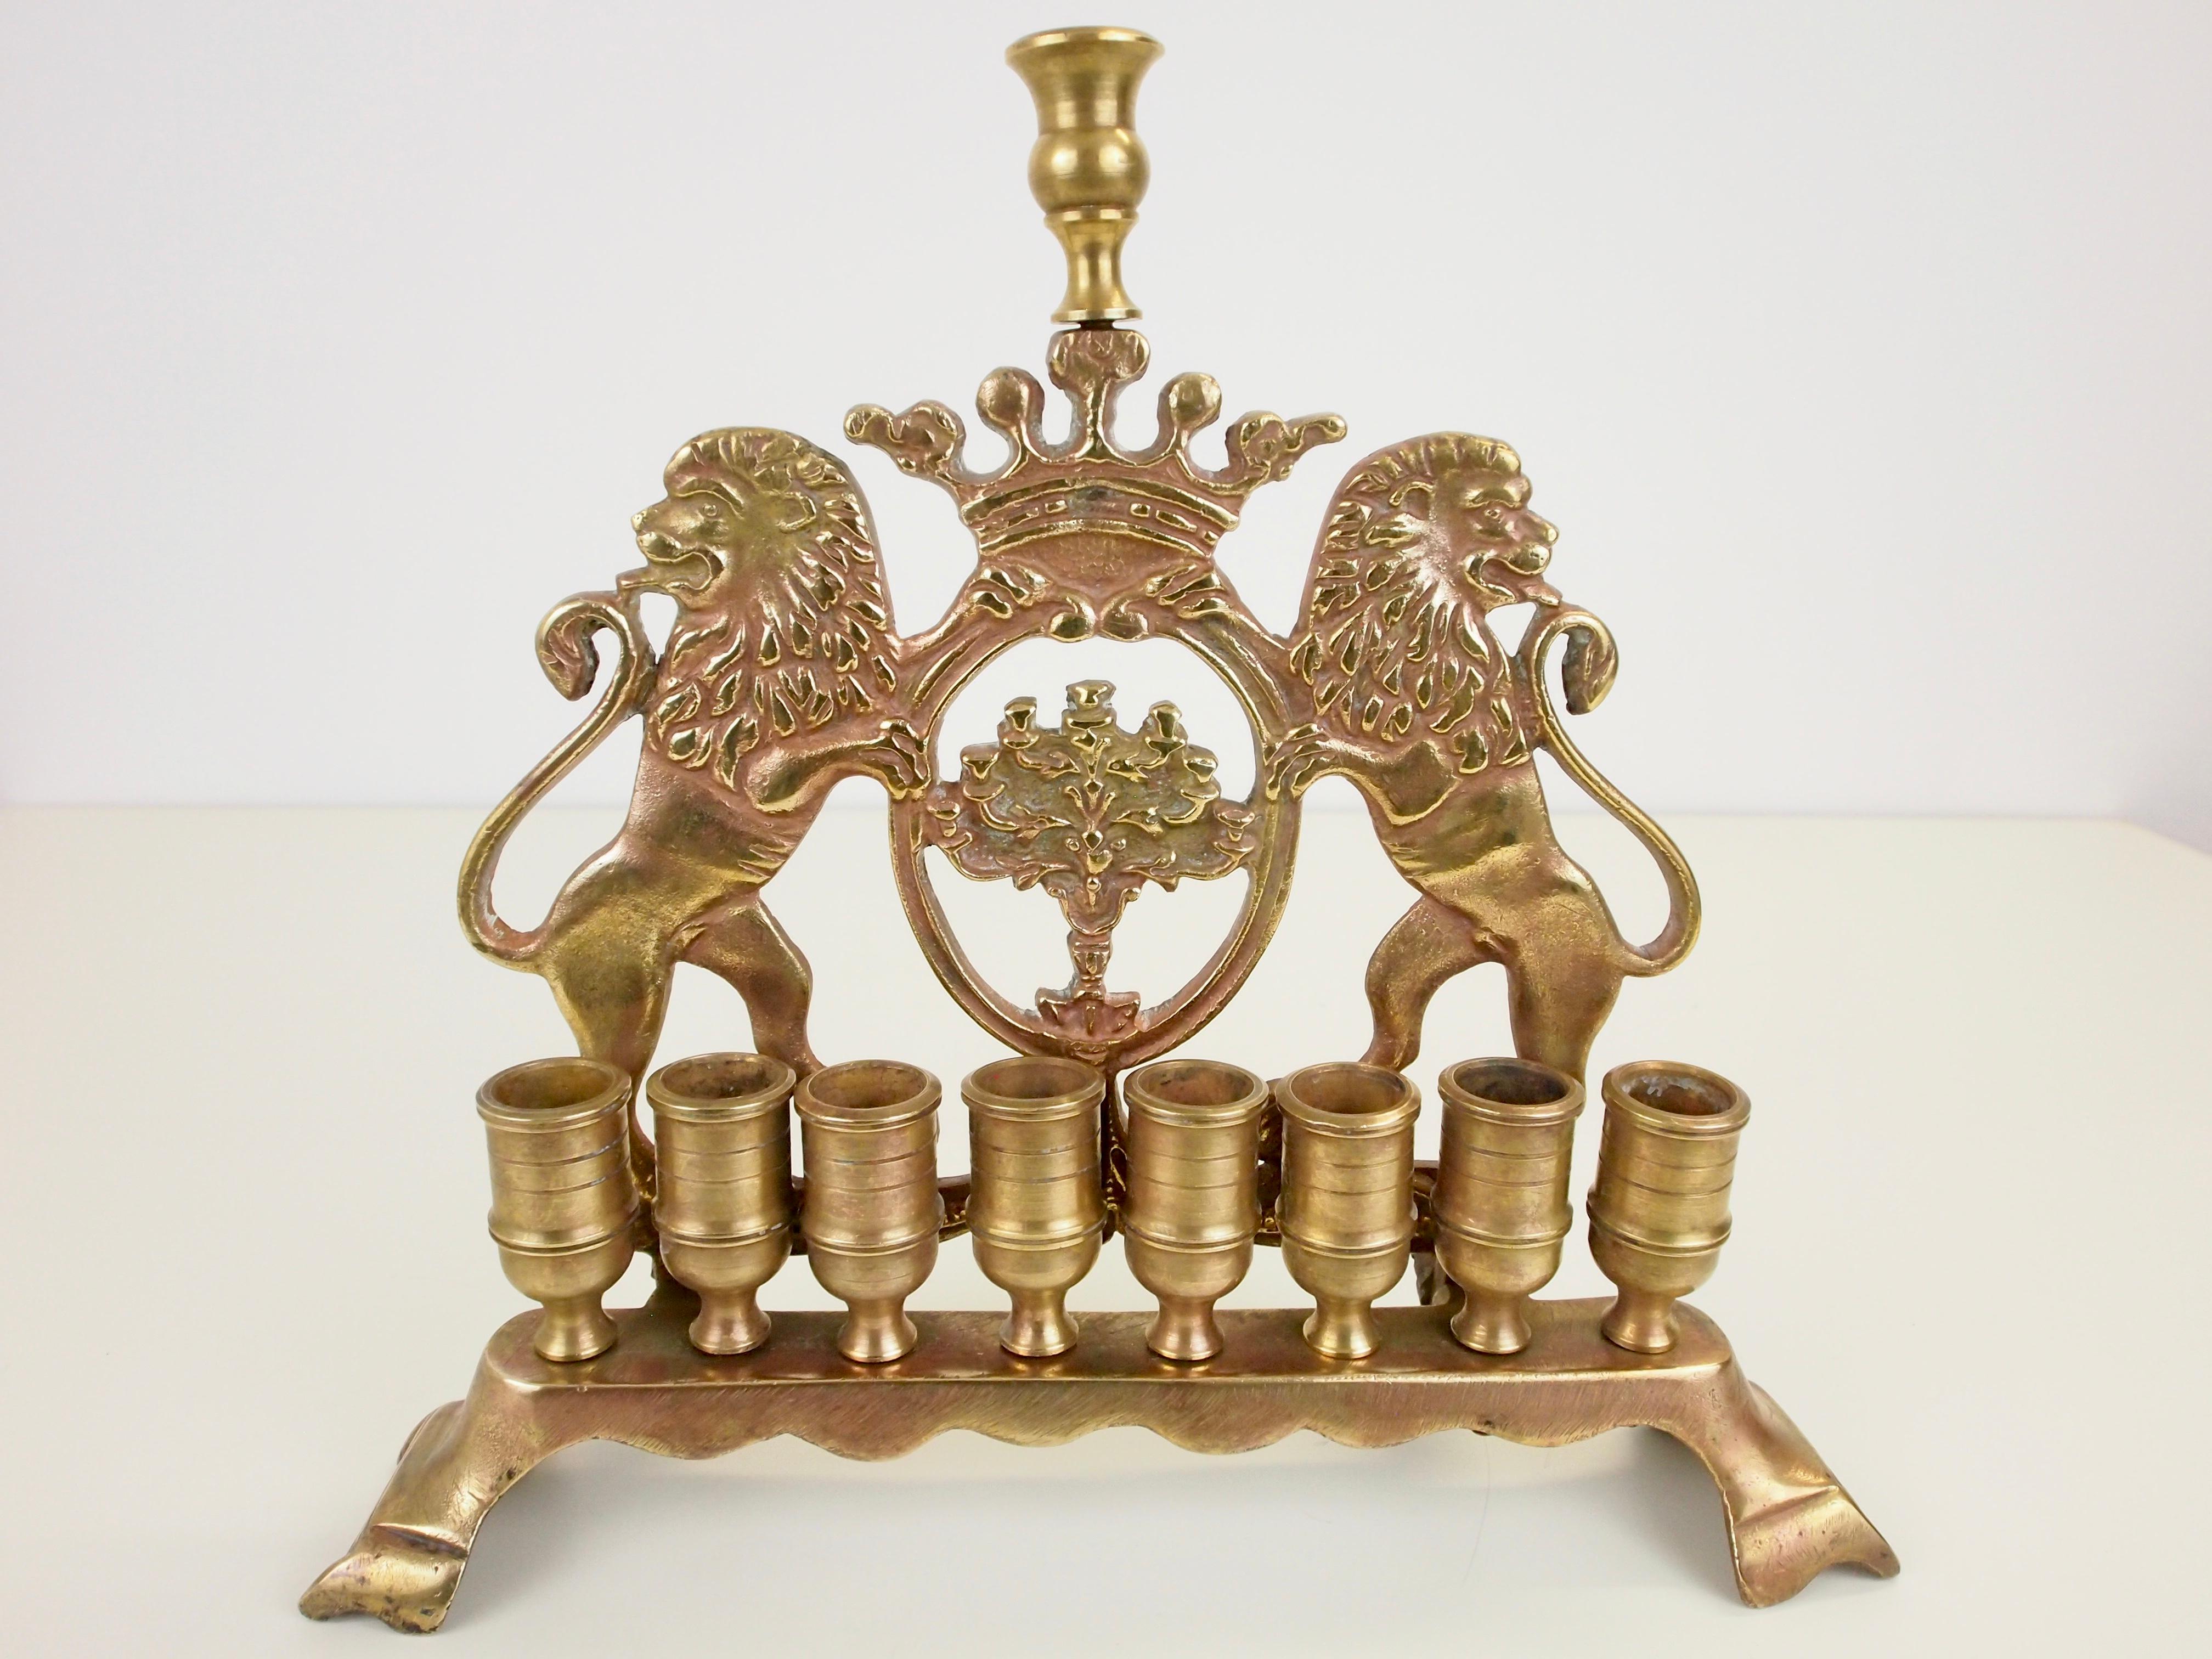 Antique Brass Chanukah Menora with Judicia Lions For Sale 1